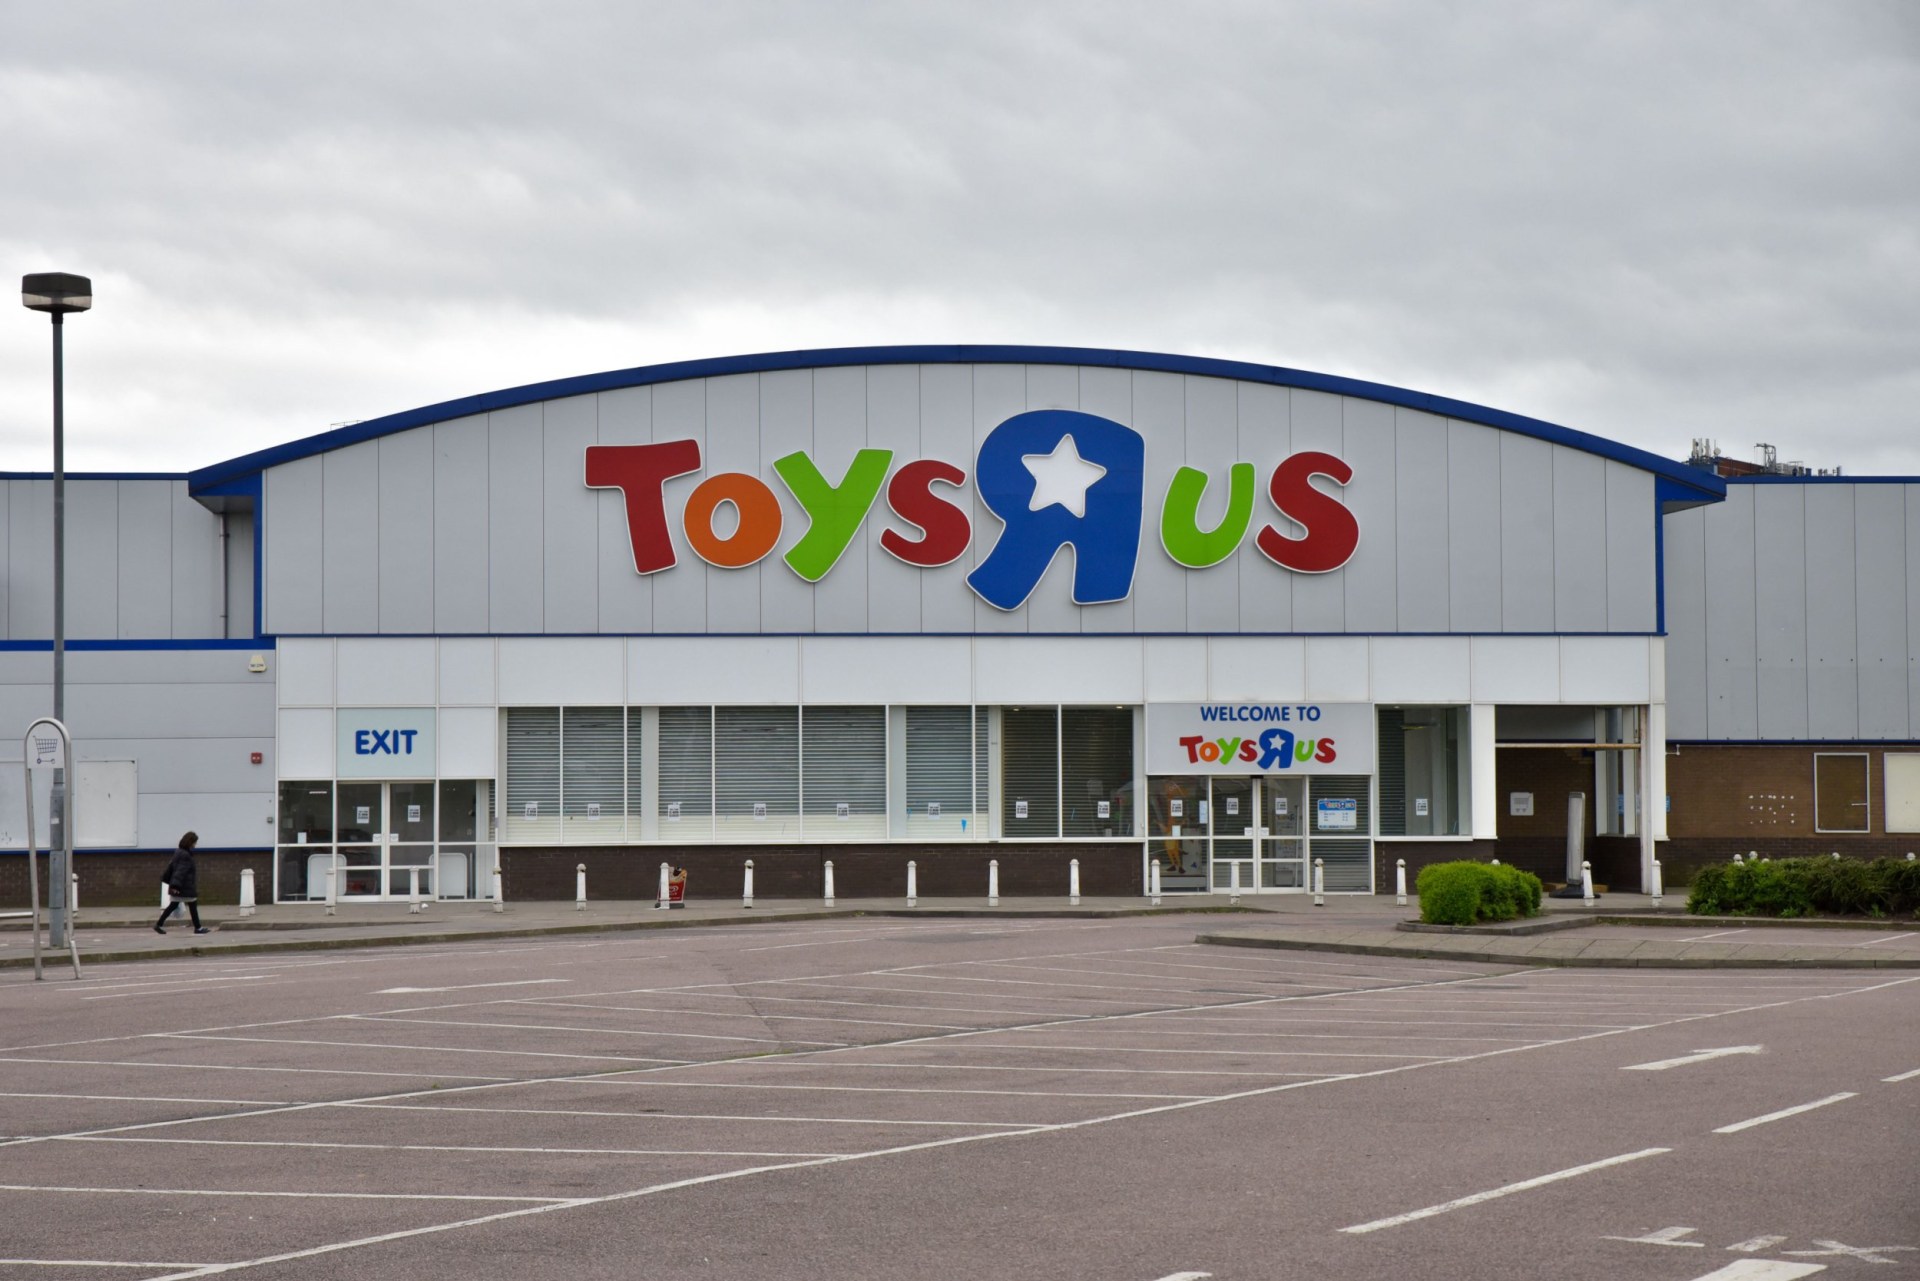 map shows were 17 new toys r us shops will open across uk